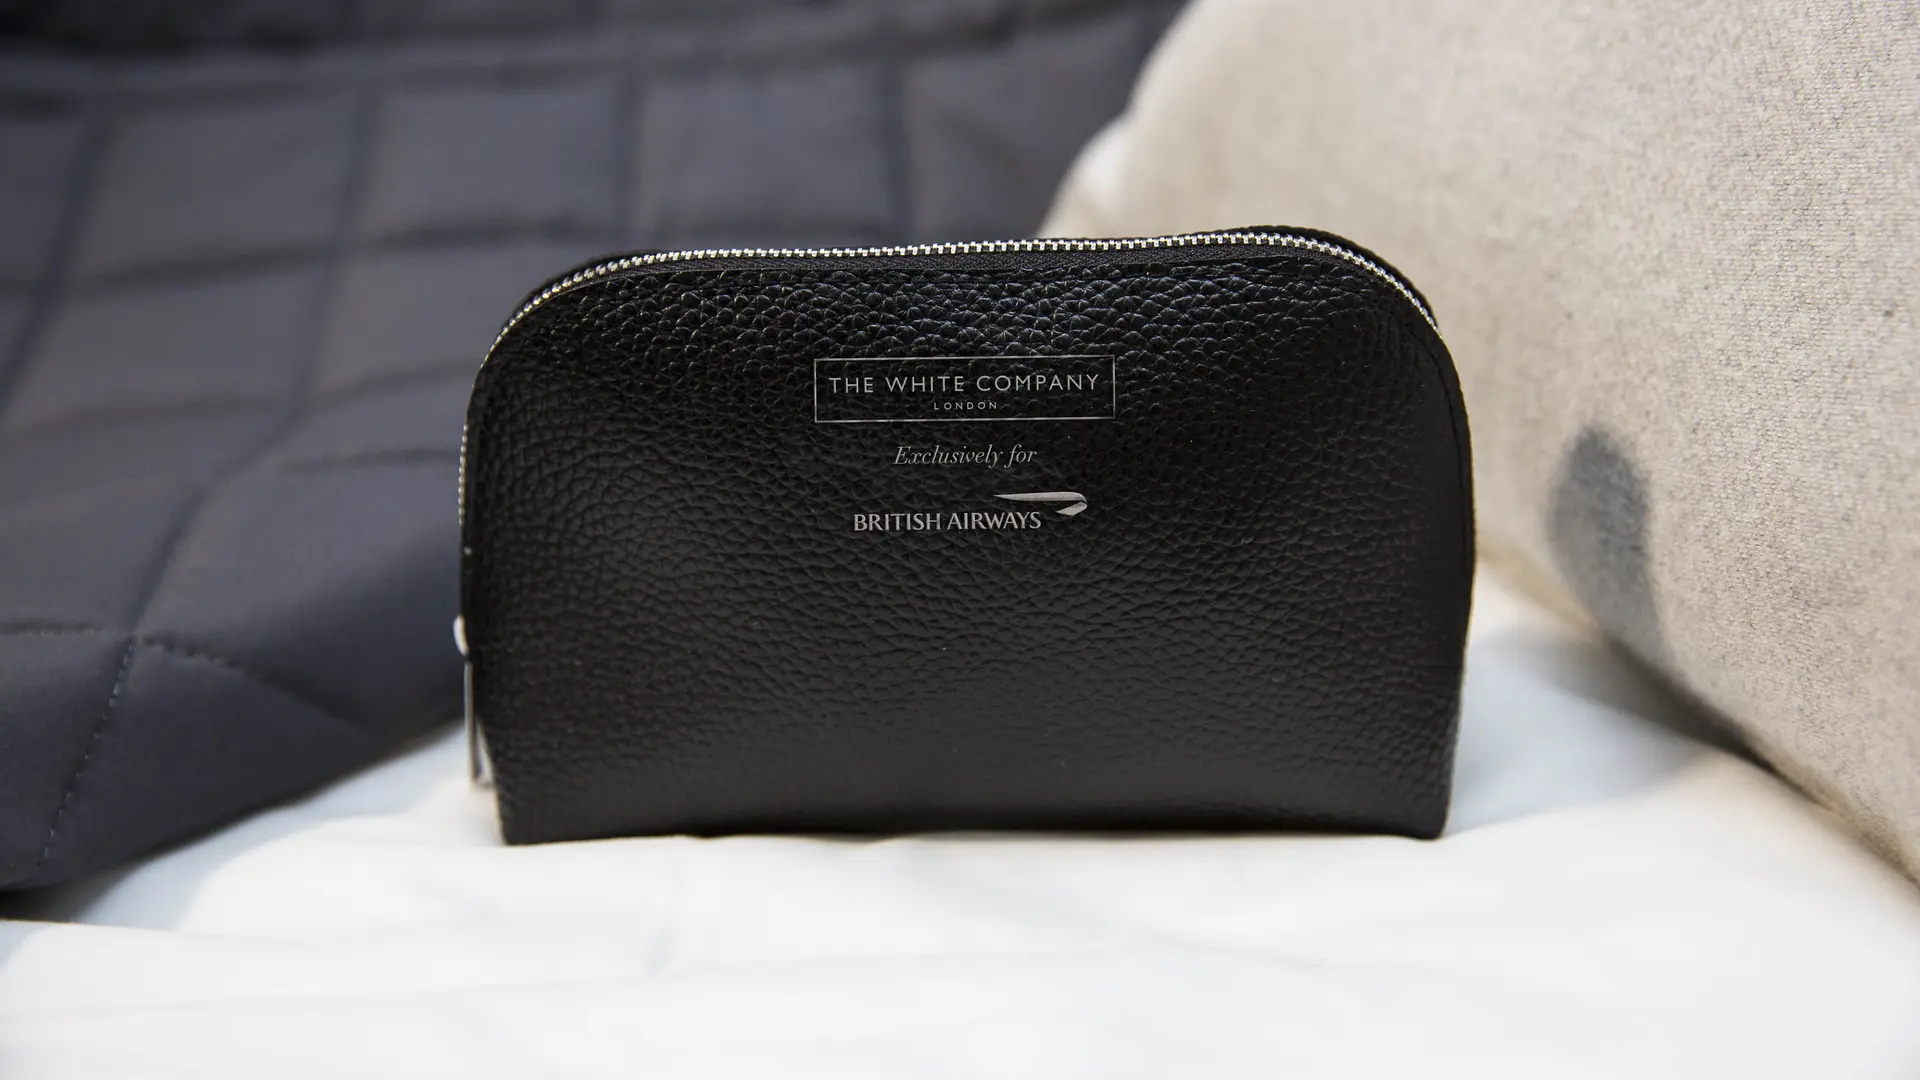 Airlines Articles - Five of the Best Amenity Kits in Business Class